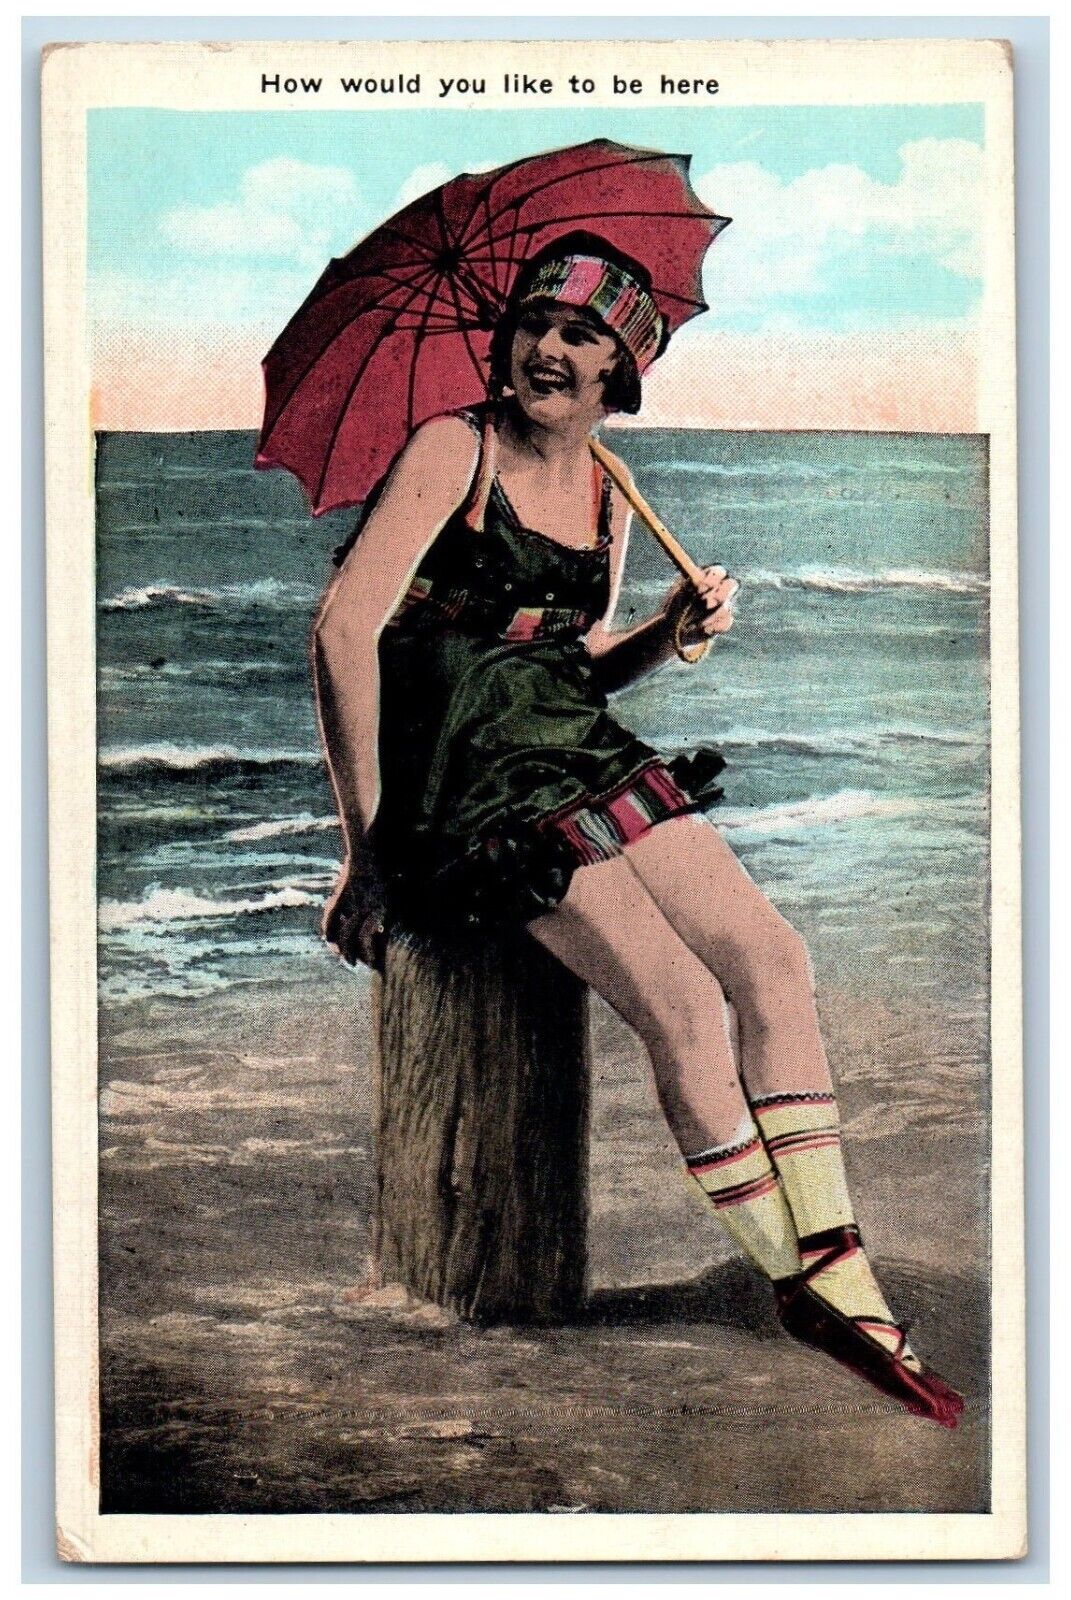 Beach Bathing Beauty Postcard How Would You Like To Be Here c1930's Vintage